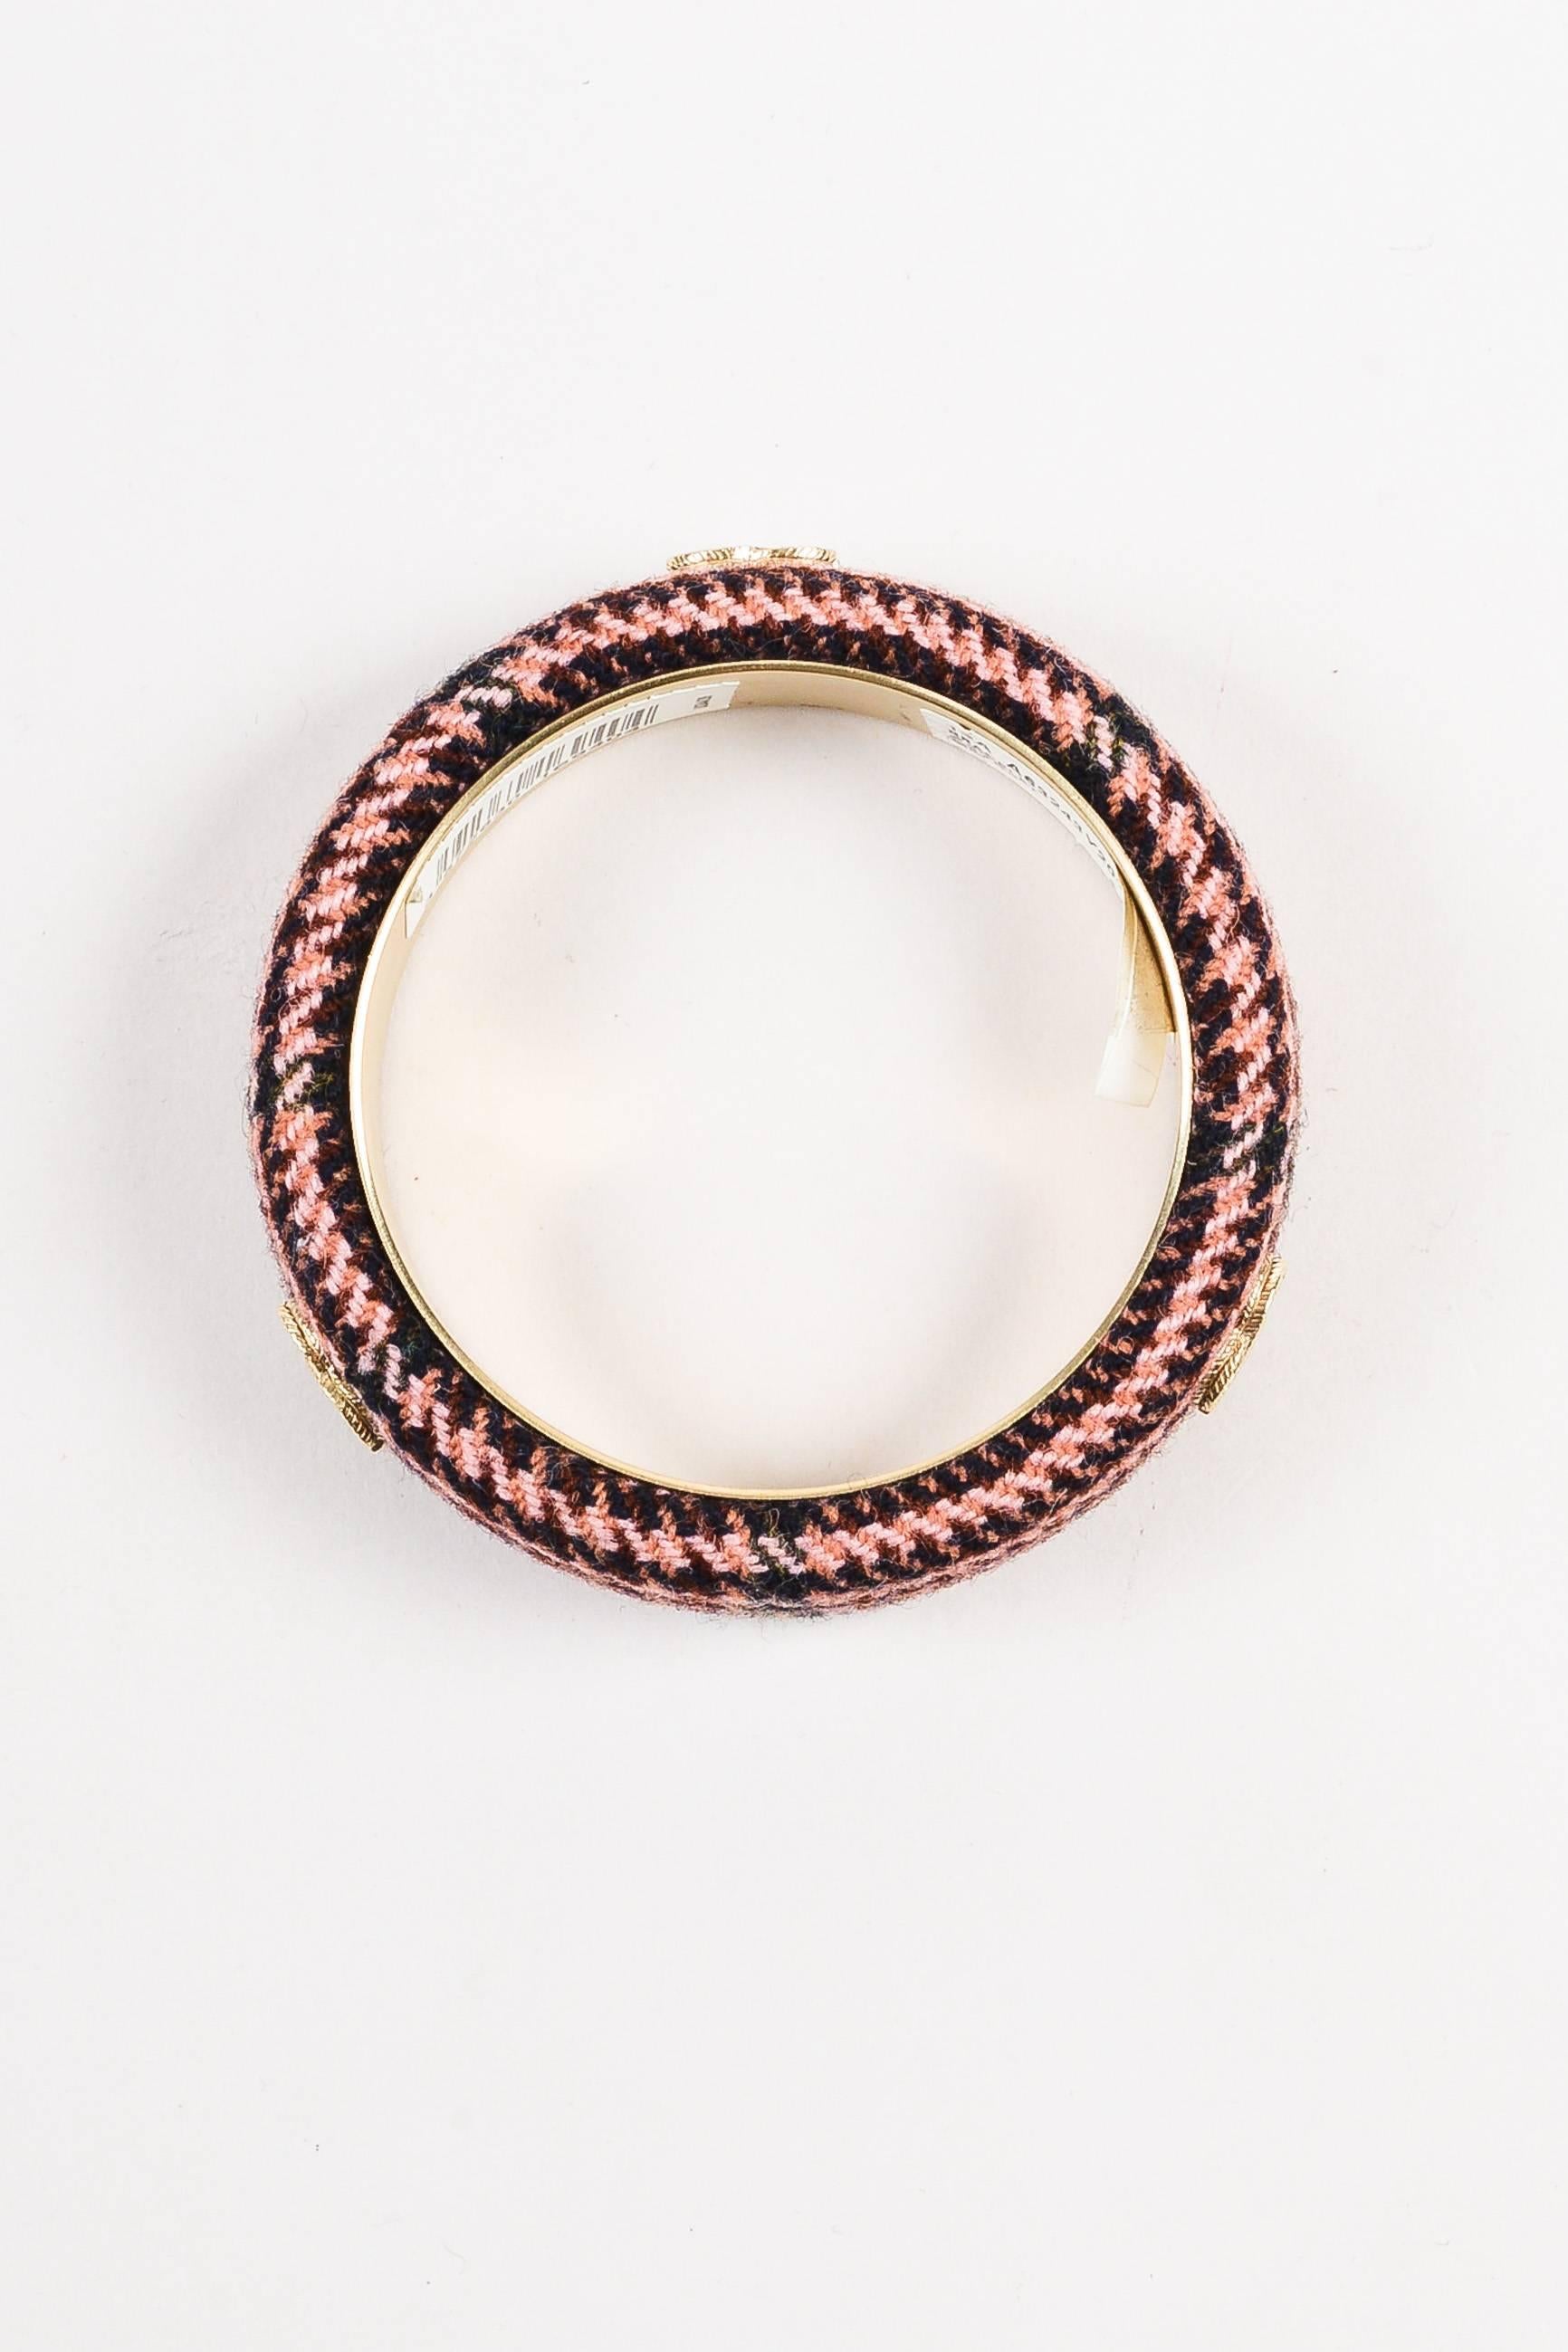 Women's Chanel Fall Collection Pink Brown Tweed Gold Tone 'CC' Bangle Bracelet SZ M For Sale